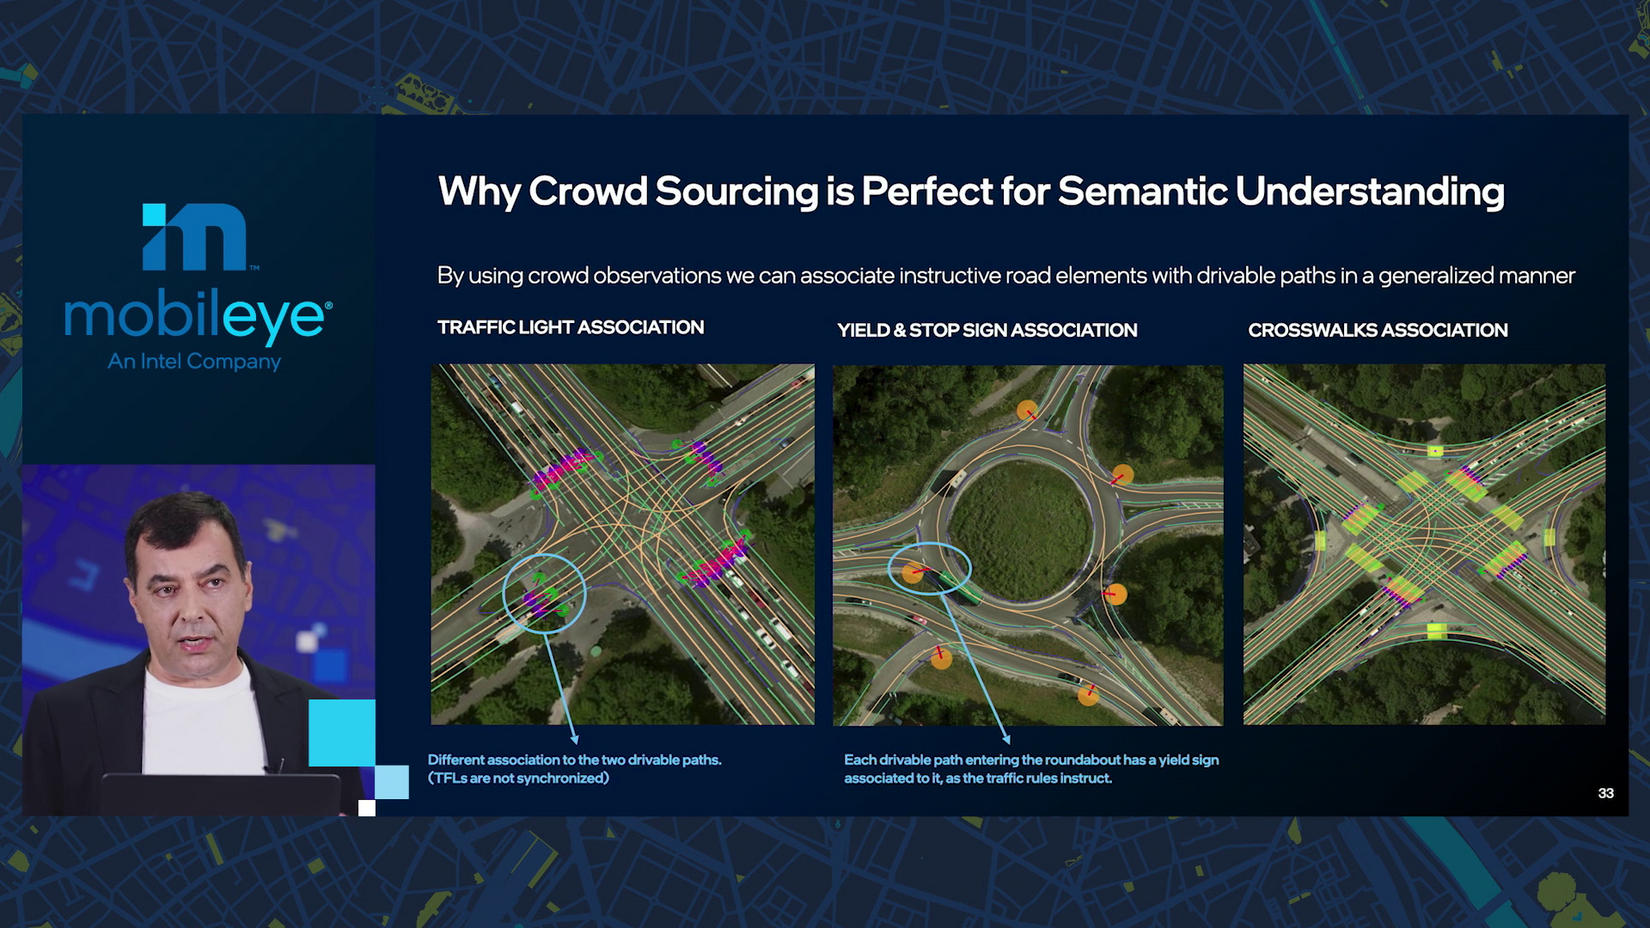 Why crowd sourcing is perfect for semantic understanding? Part 1